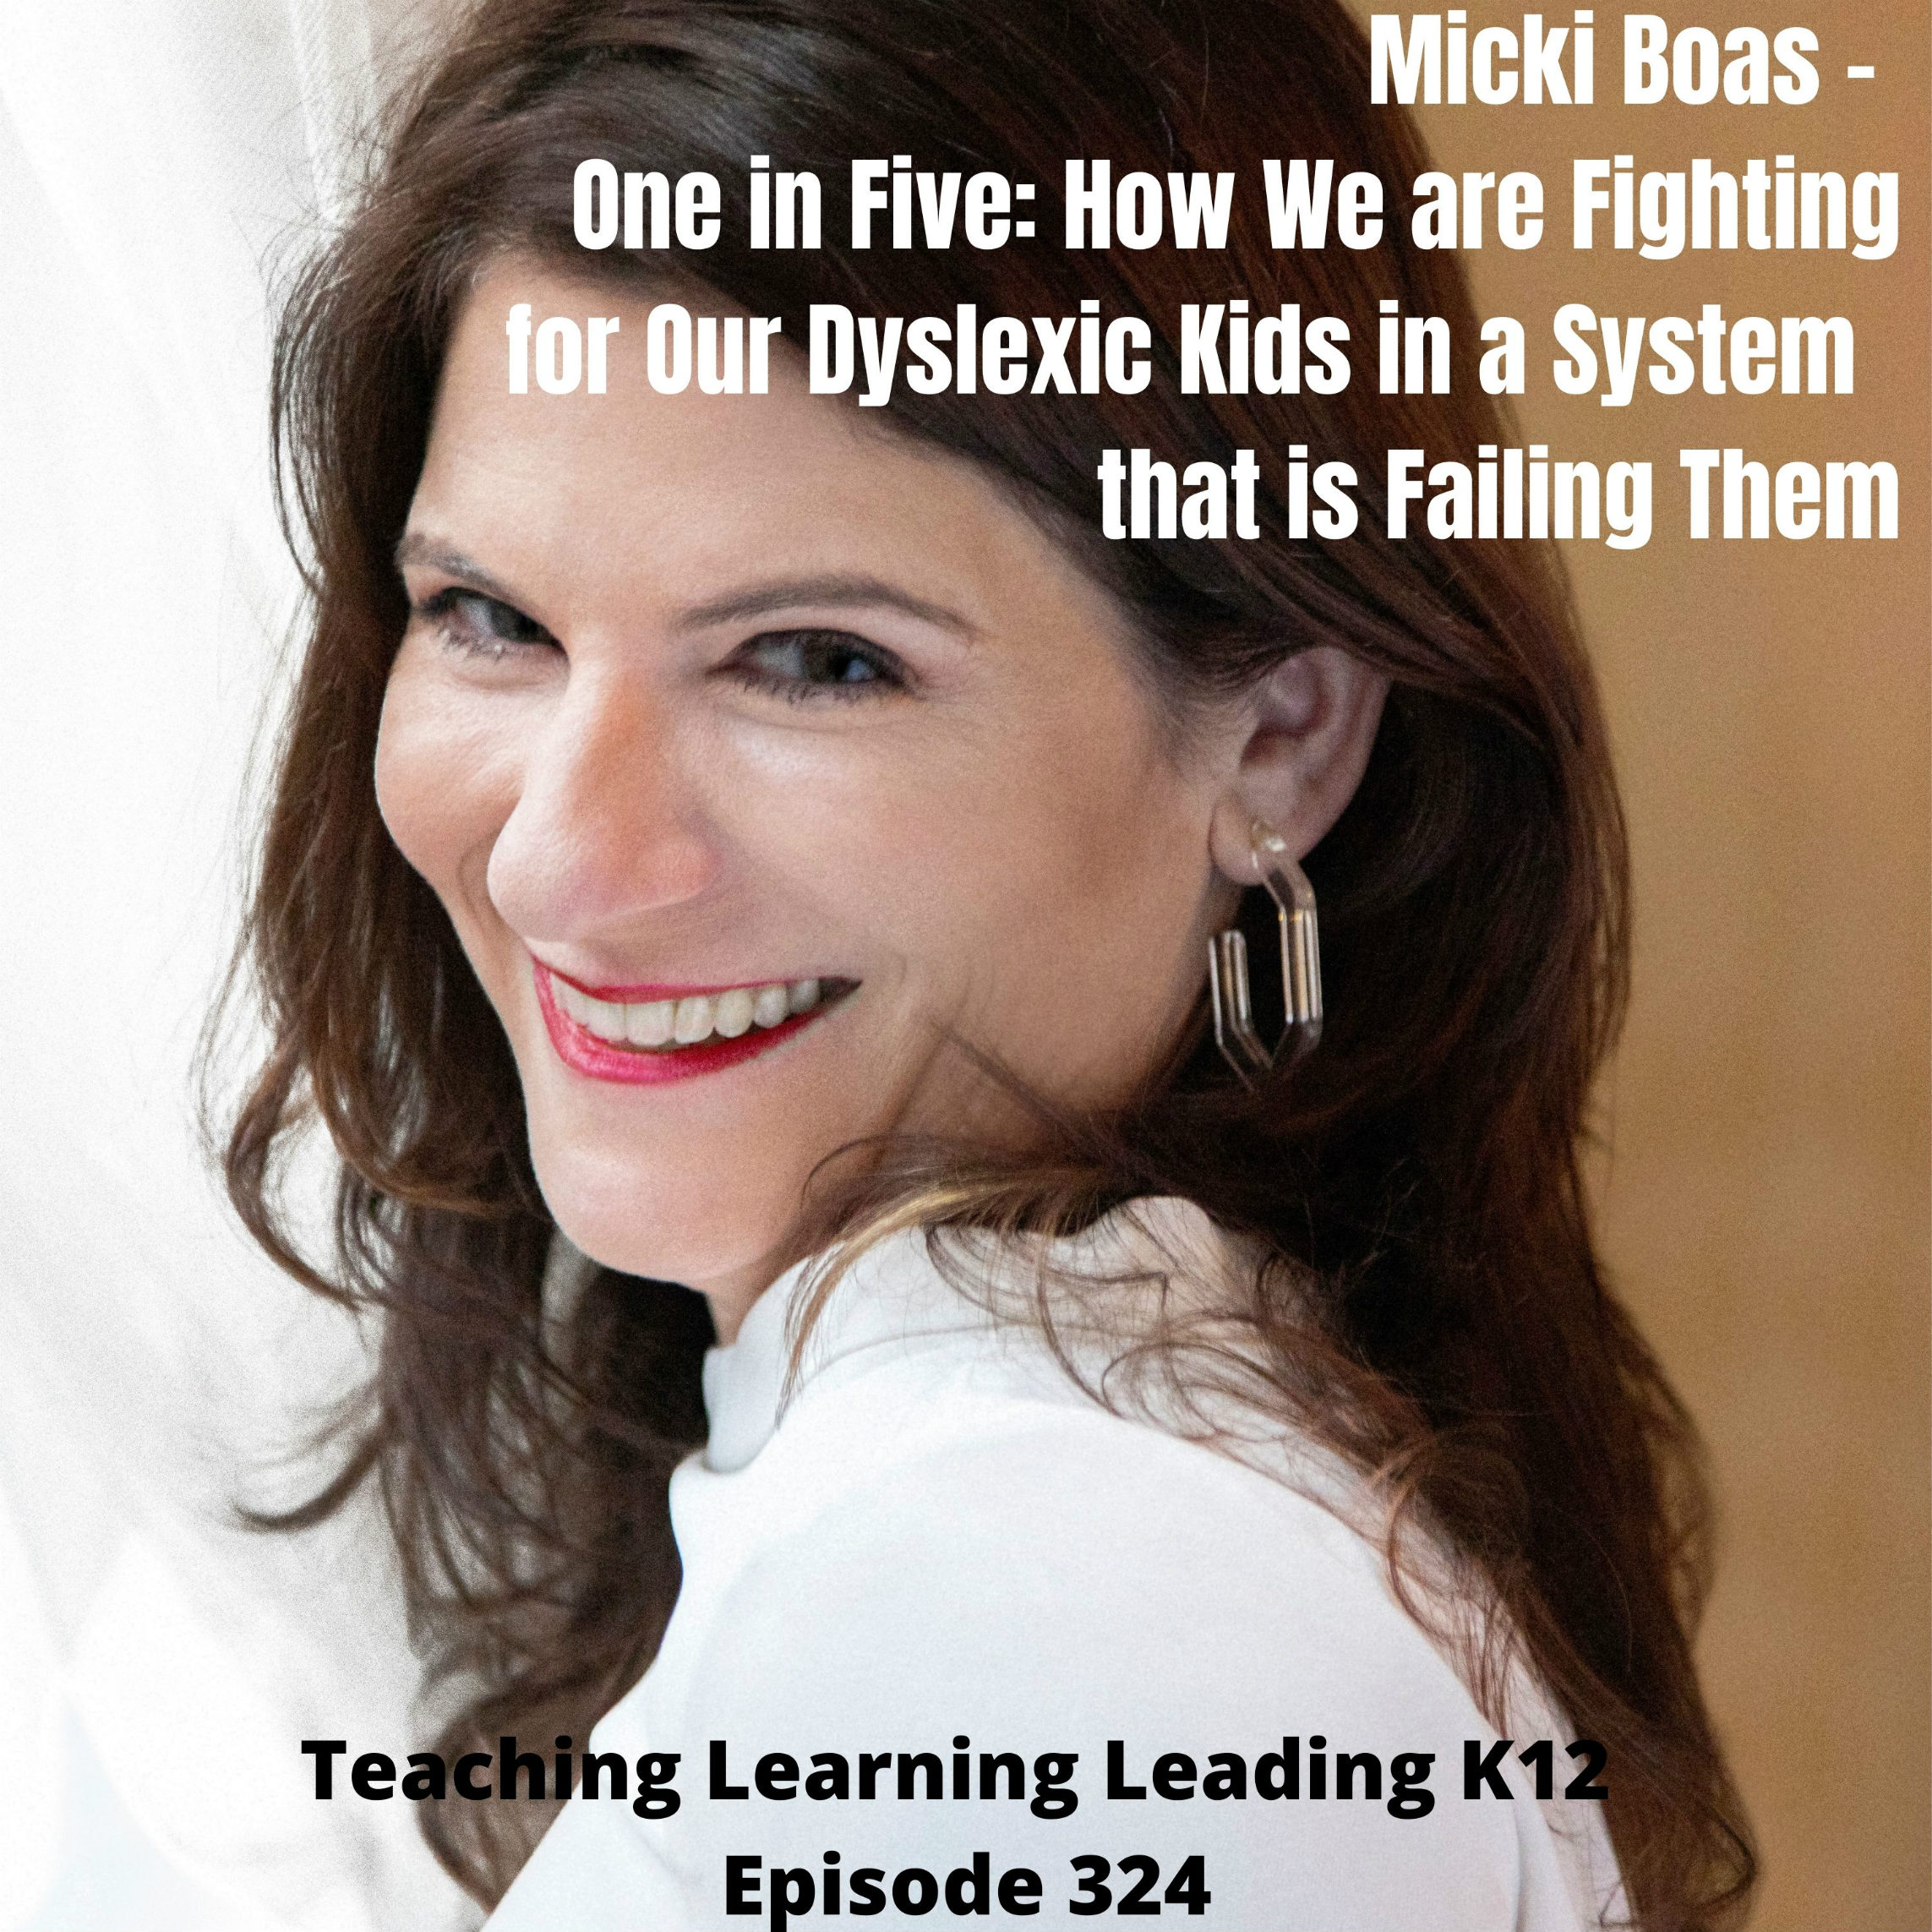 Micki Boas - One in Five: How We are Fighting for Our Dyslexic Kids in a System that is Failing Them - 324 Image